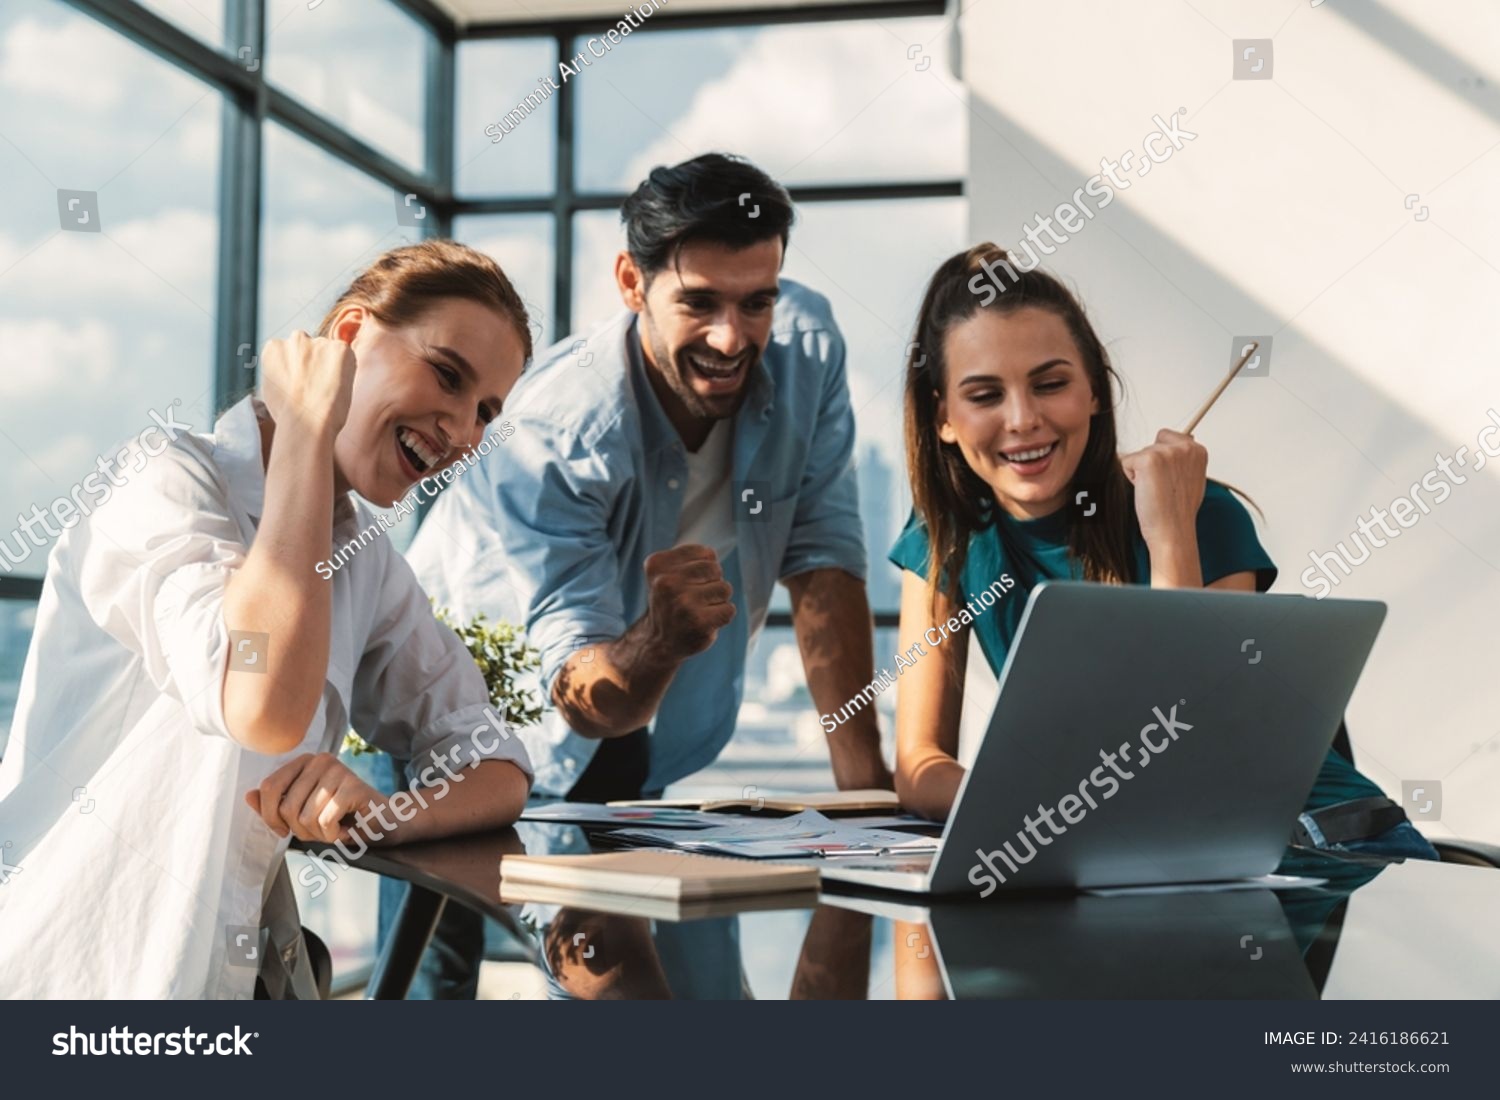 Group of happy businesspeople celebrate their successful project. Professional business team win and proud of their project at modern office. Successful teamwork, happy colleague, workplace. Tracery. #2416186621